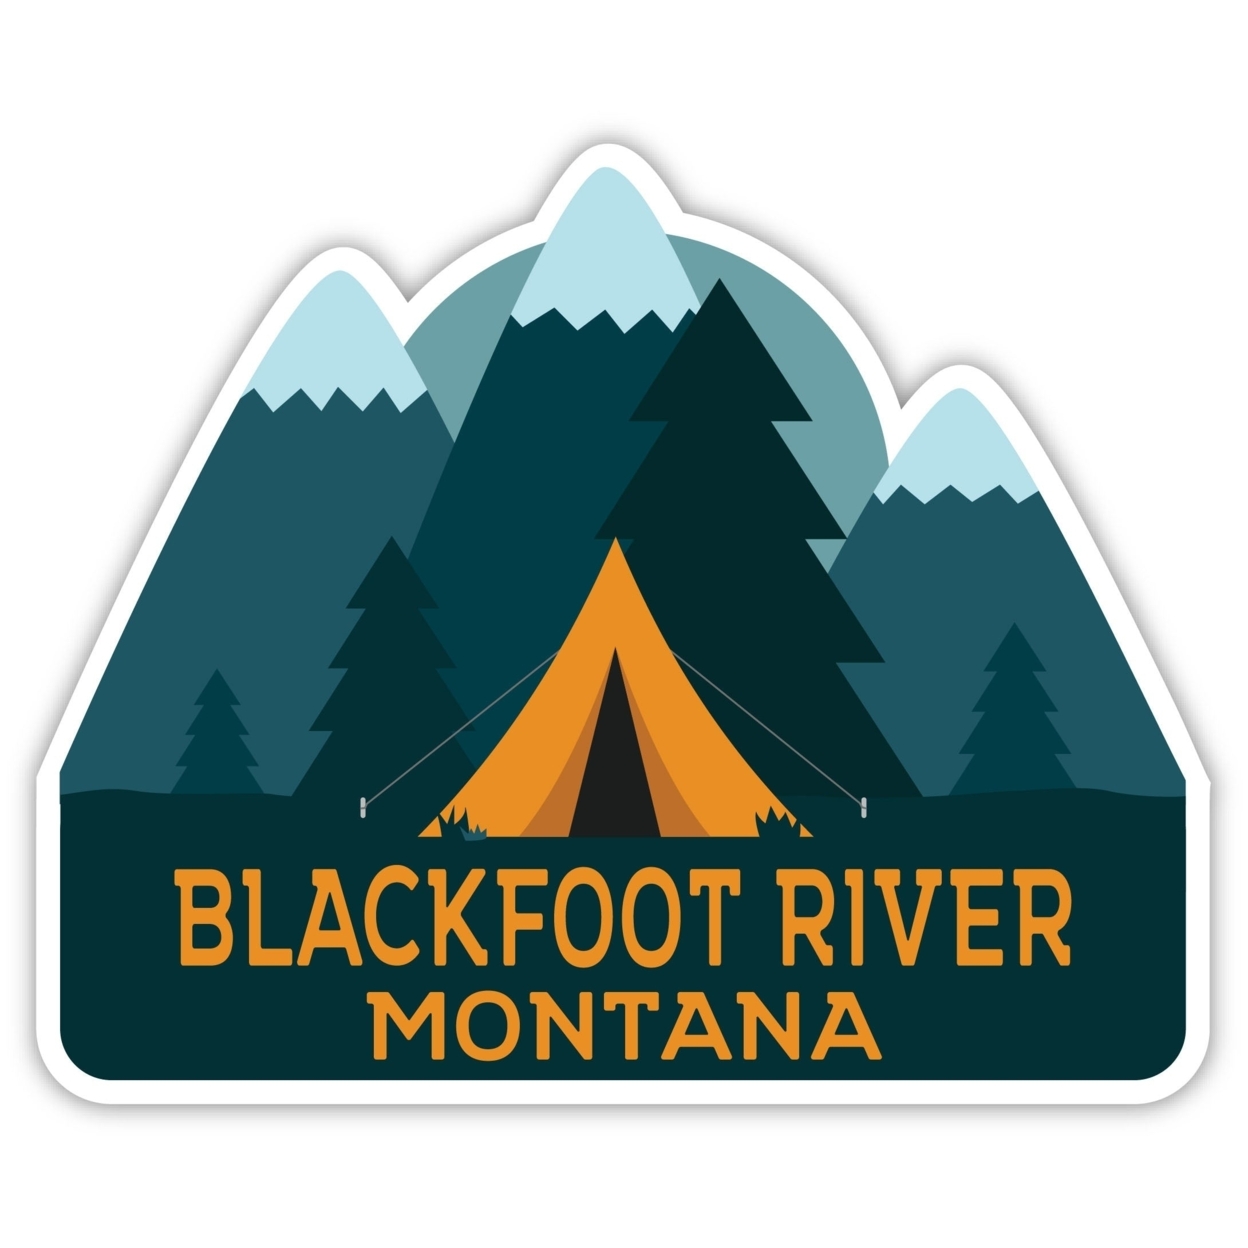 Blackfoot River Montana Souvenir Decorative Stickers (Choose Theme And Size) - 4-Pack, 4-Inch, Tent